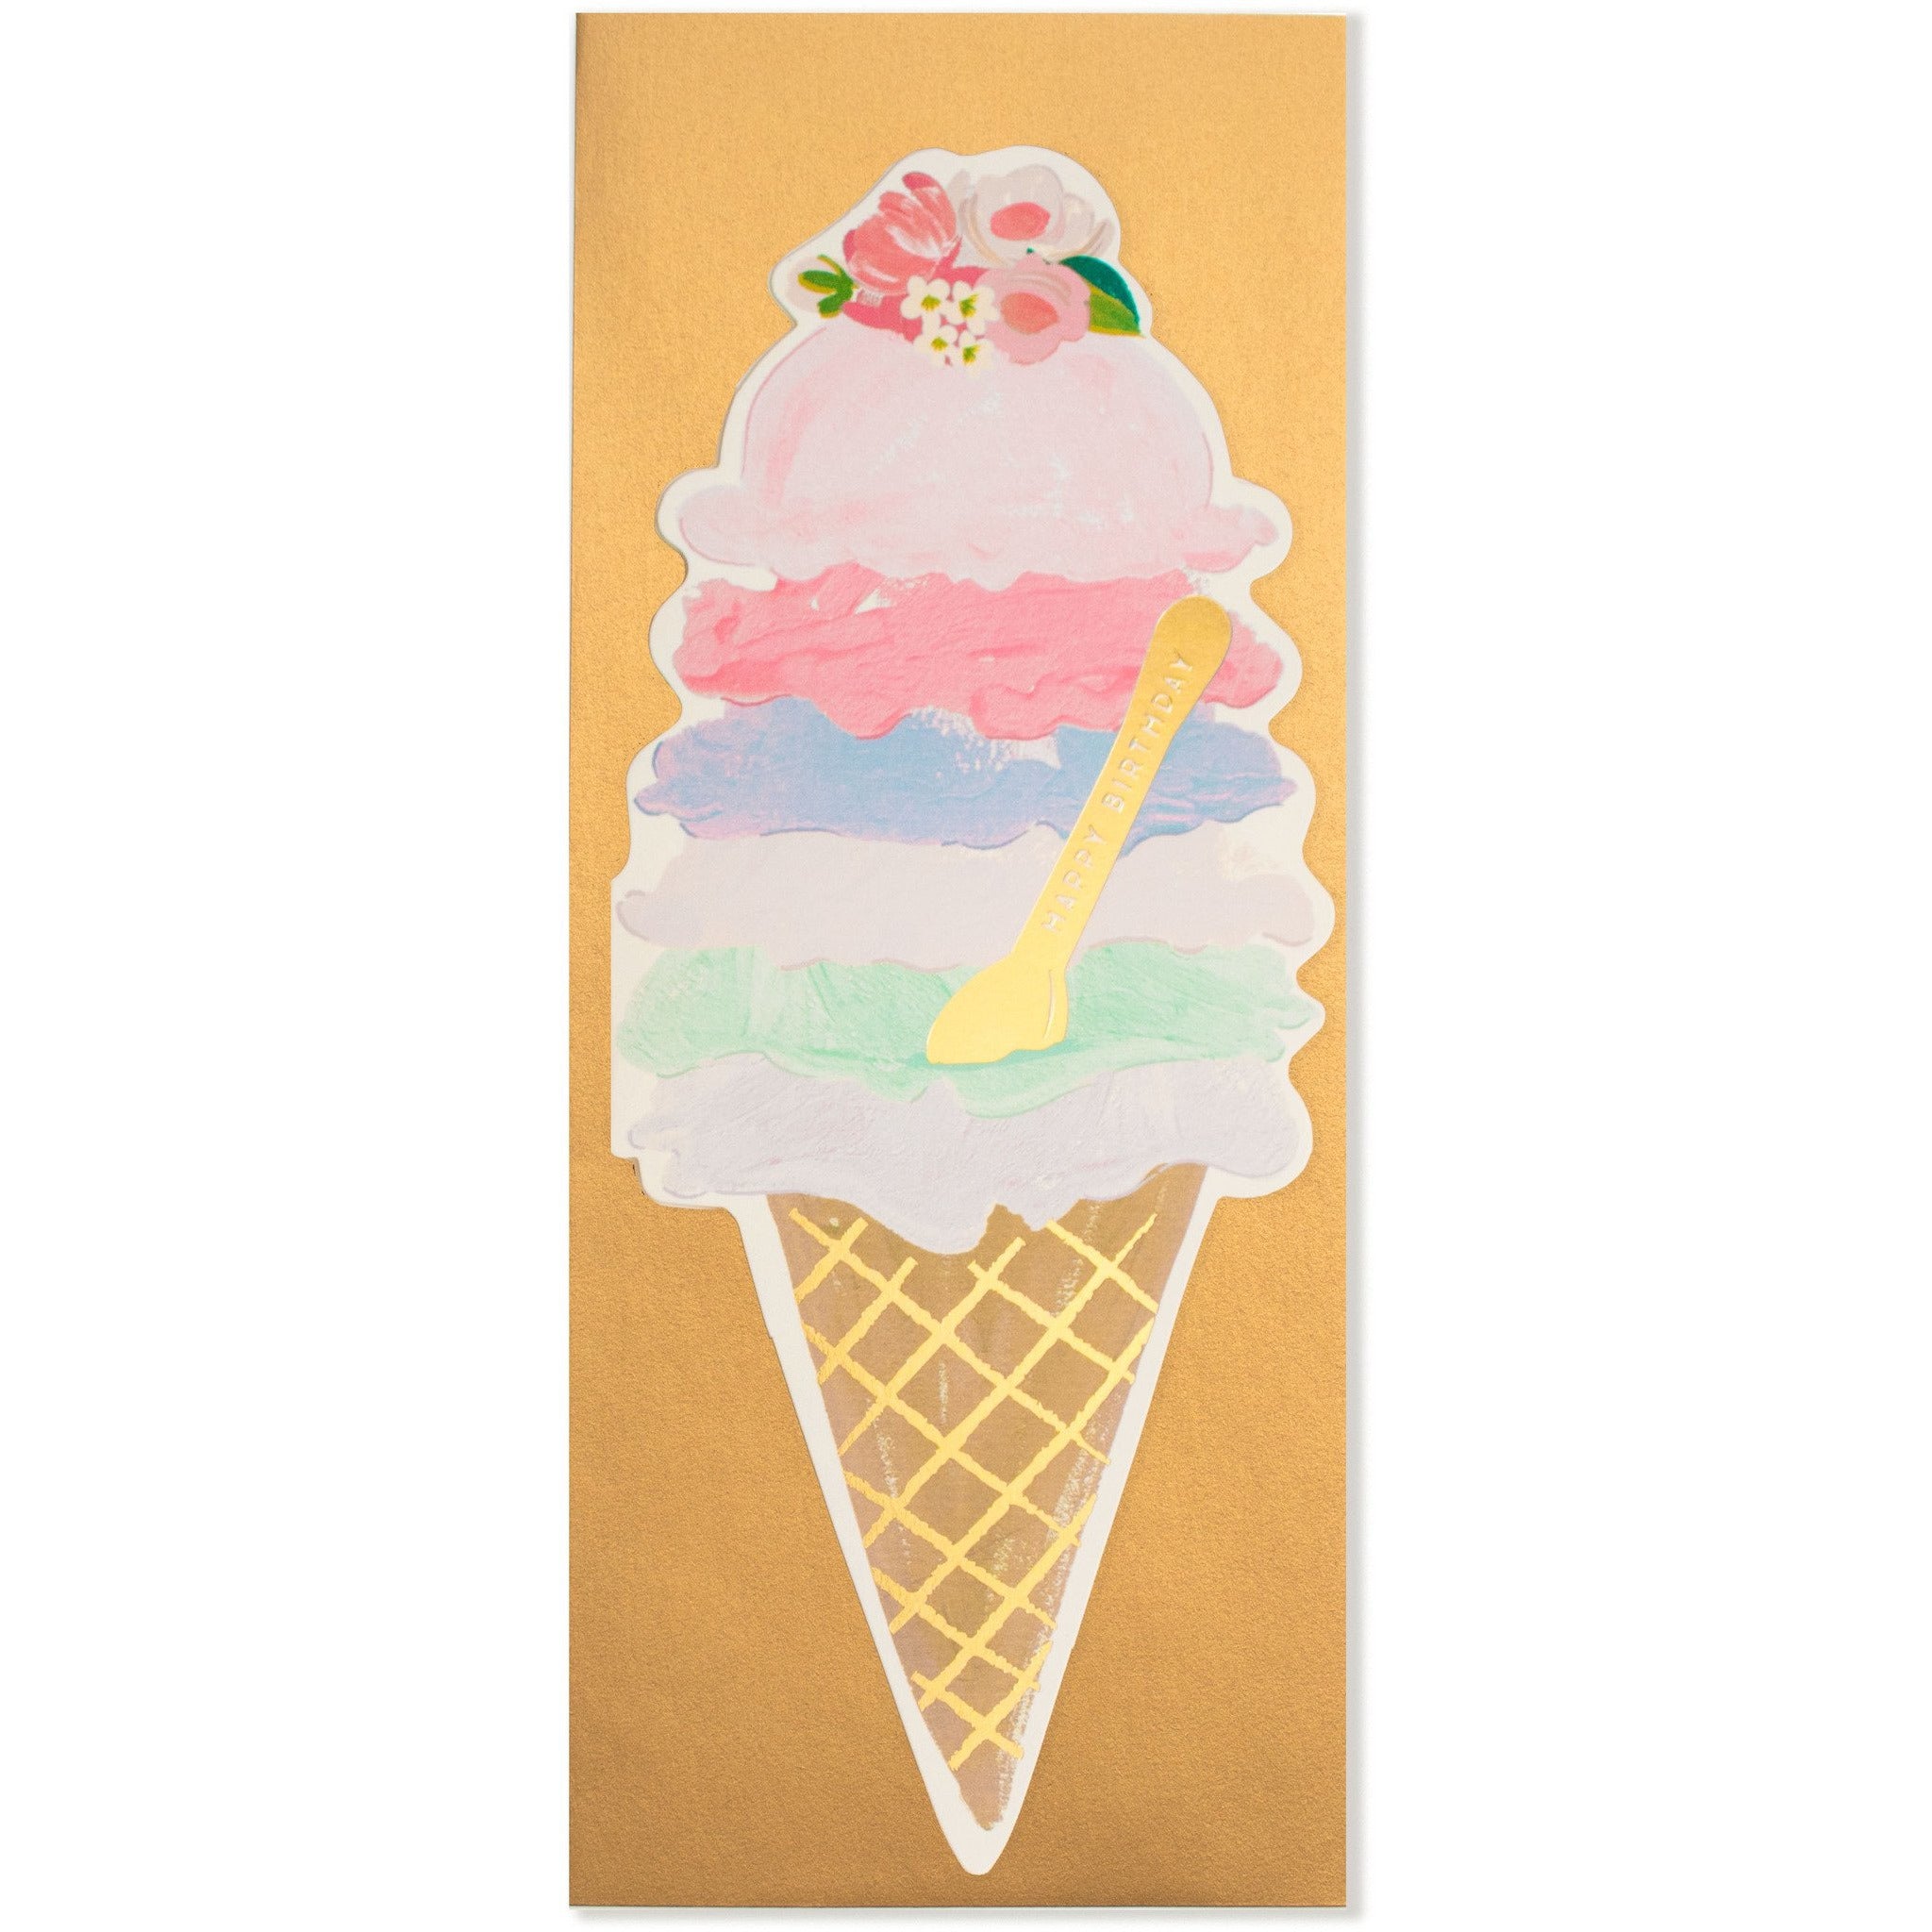 Painted Ice Cream Cone-Shaped Birthday Card with Golden Envelope - The First Snow